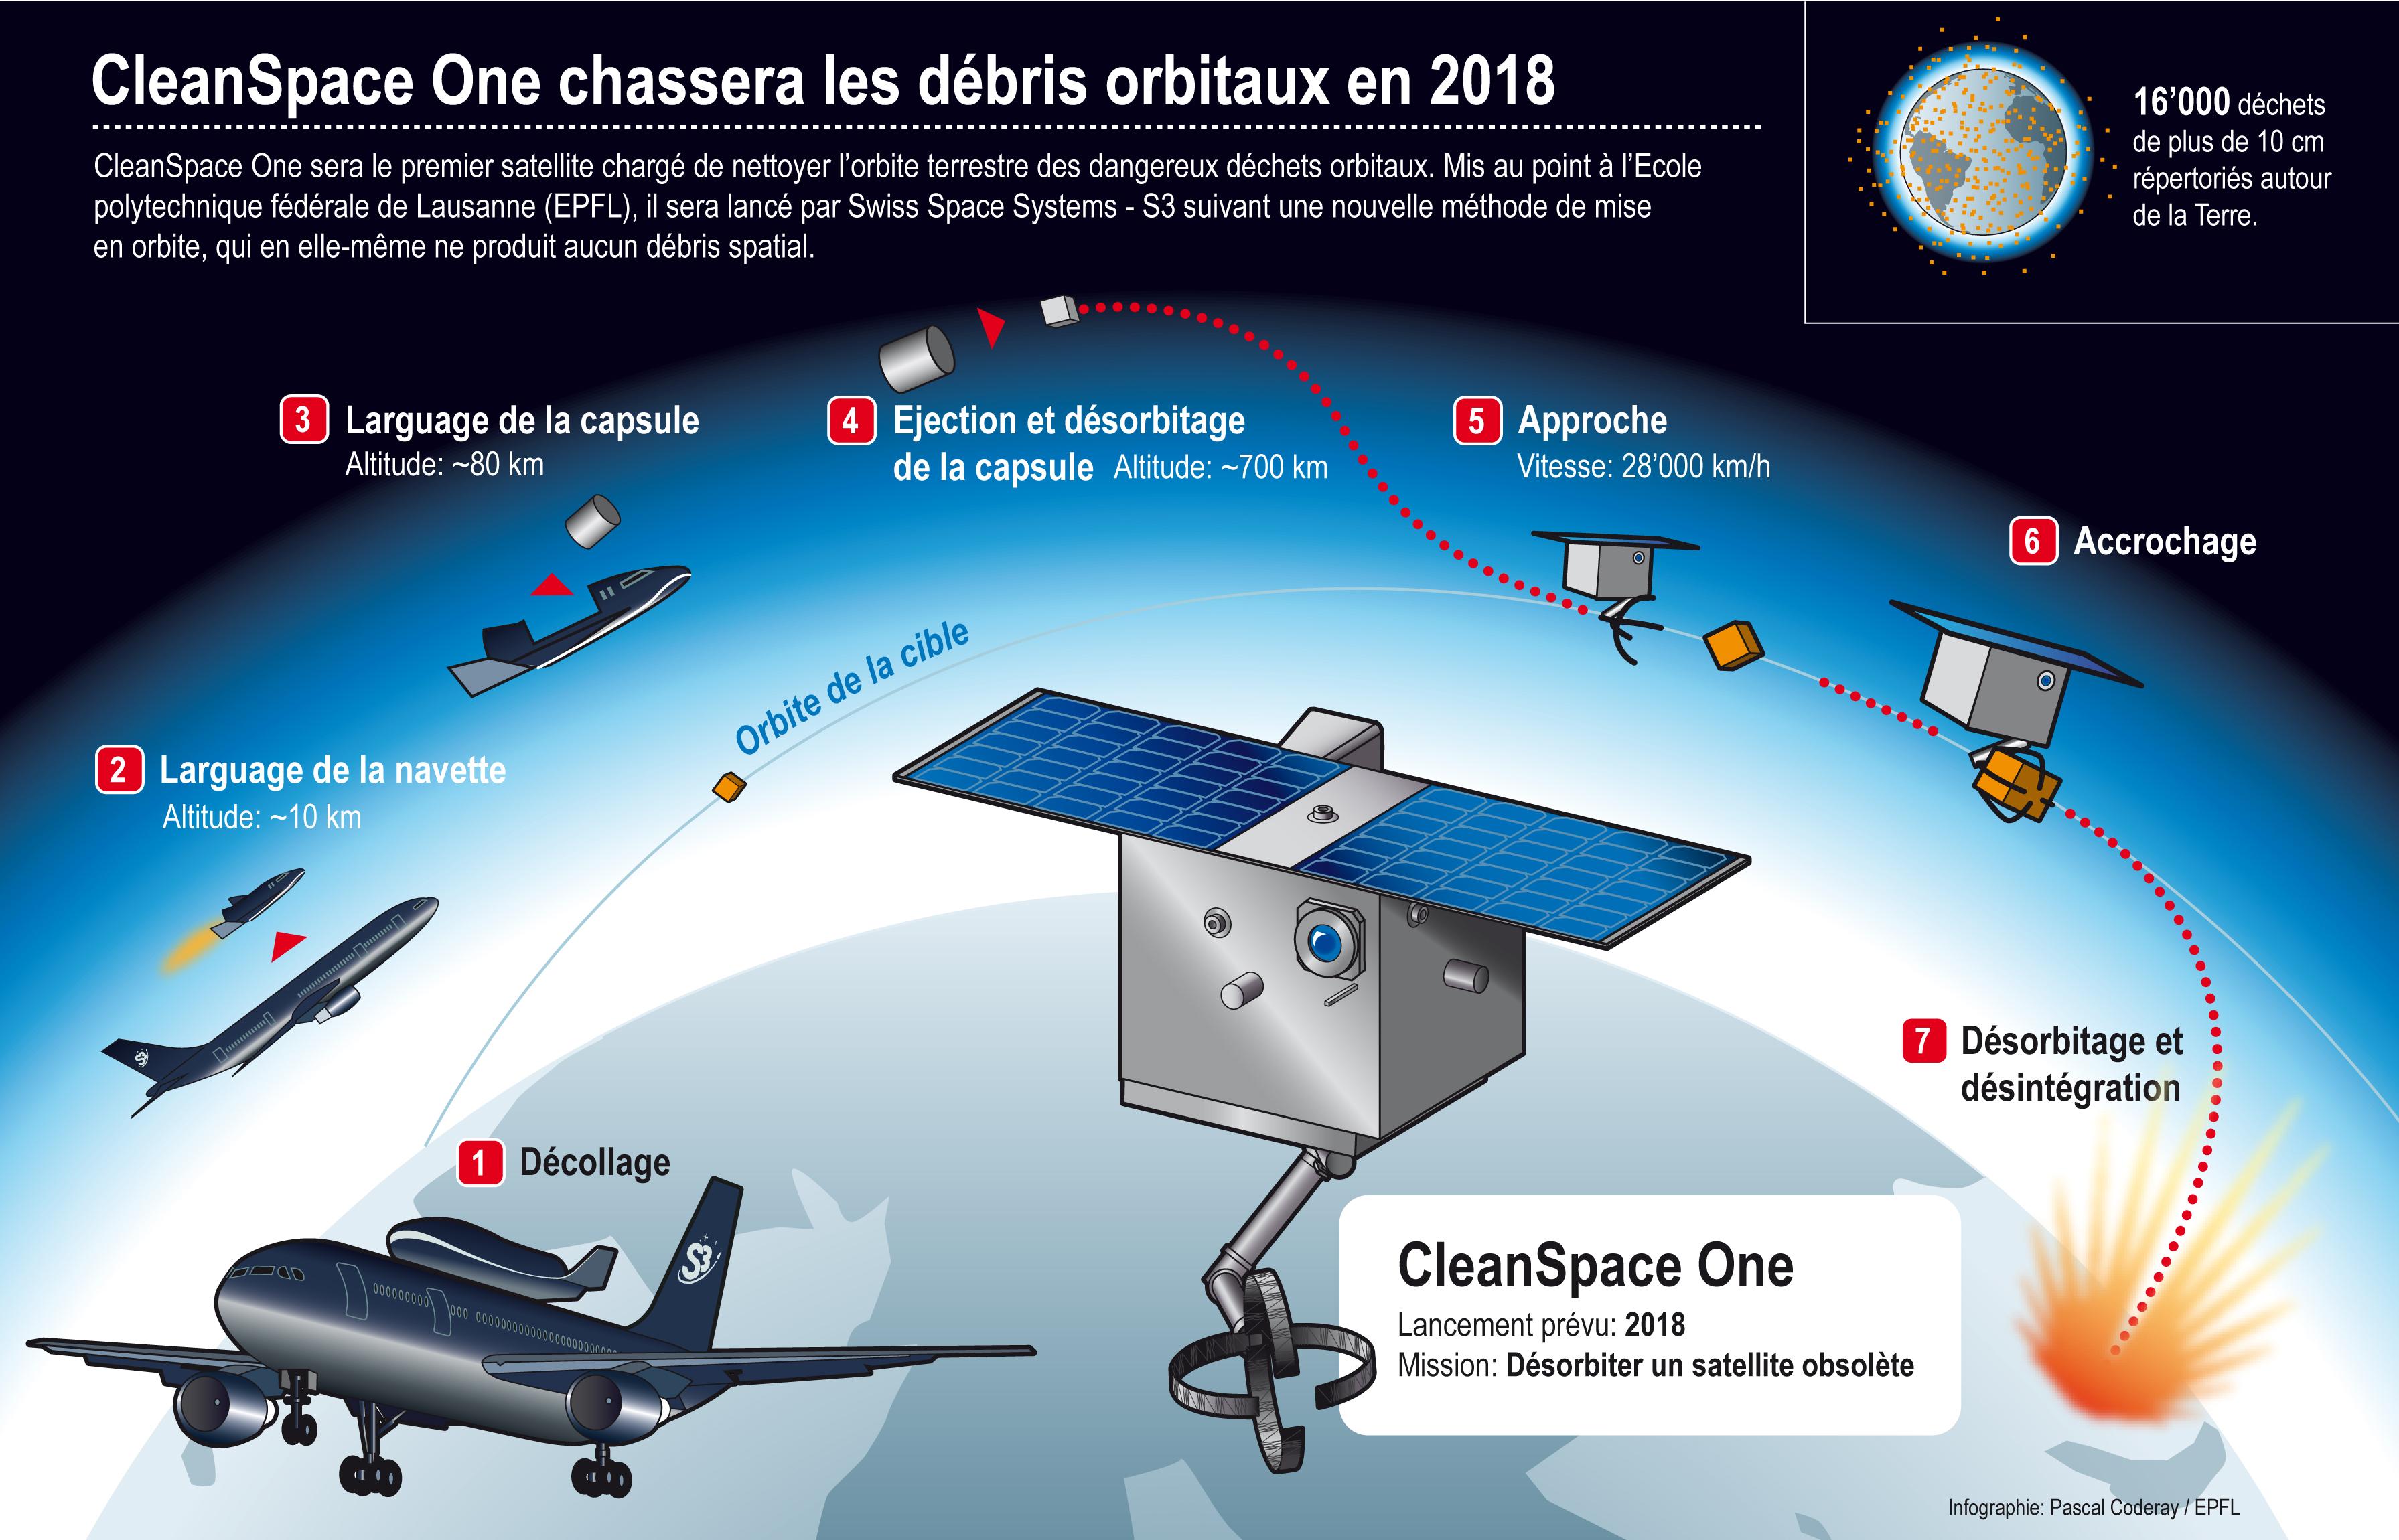 cleanspace_one_infografic.jpg